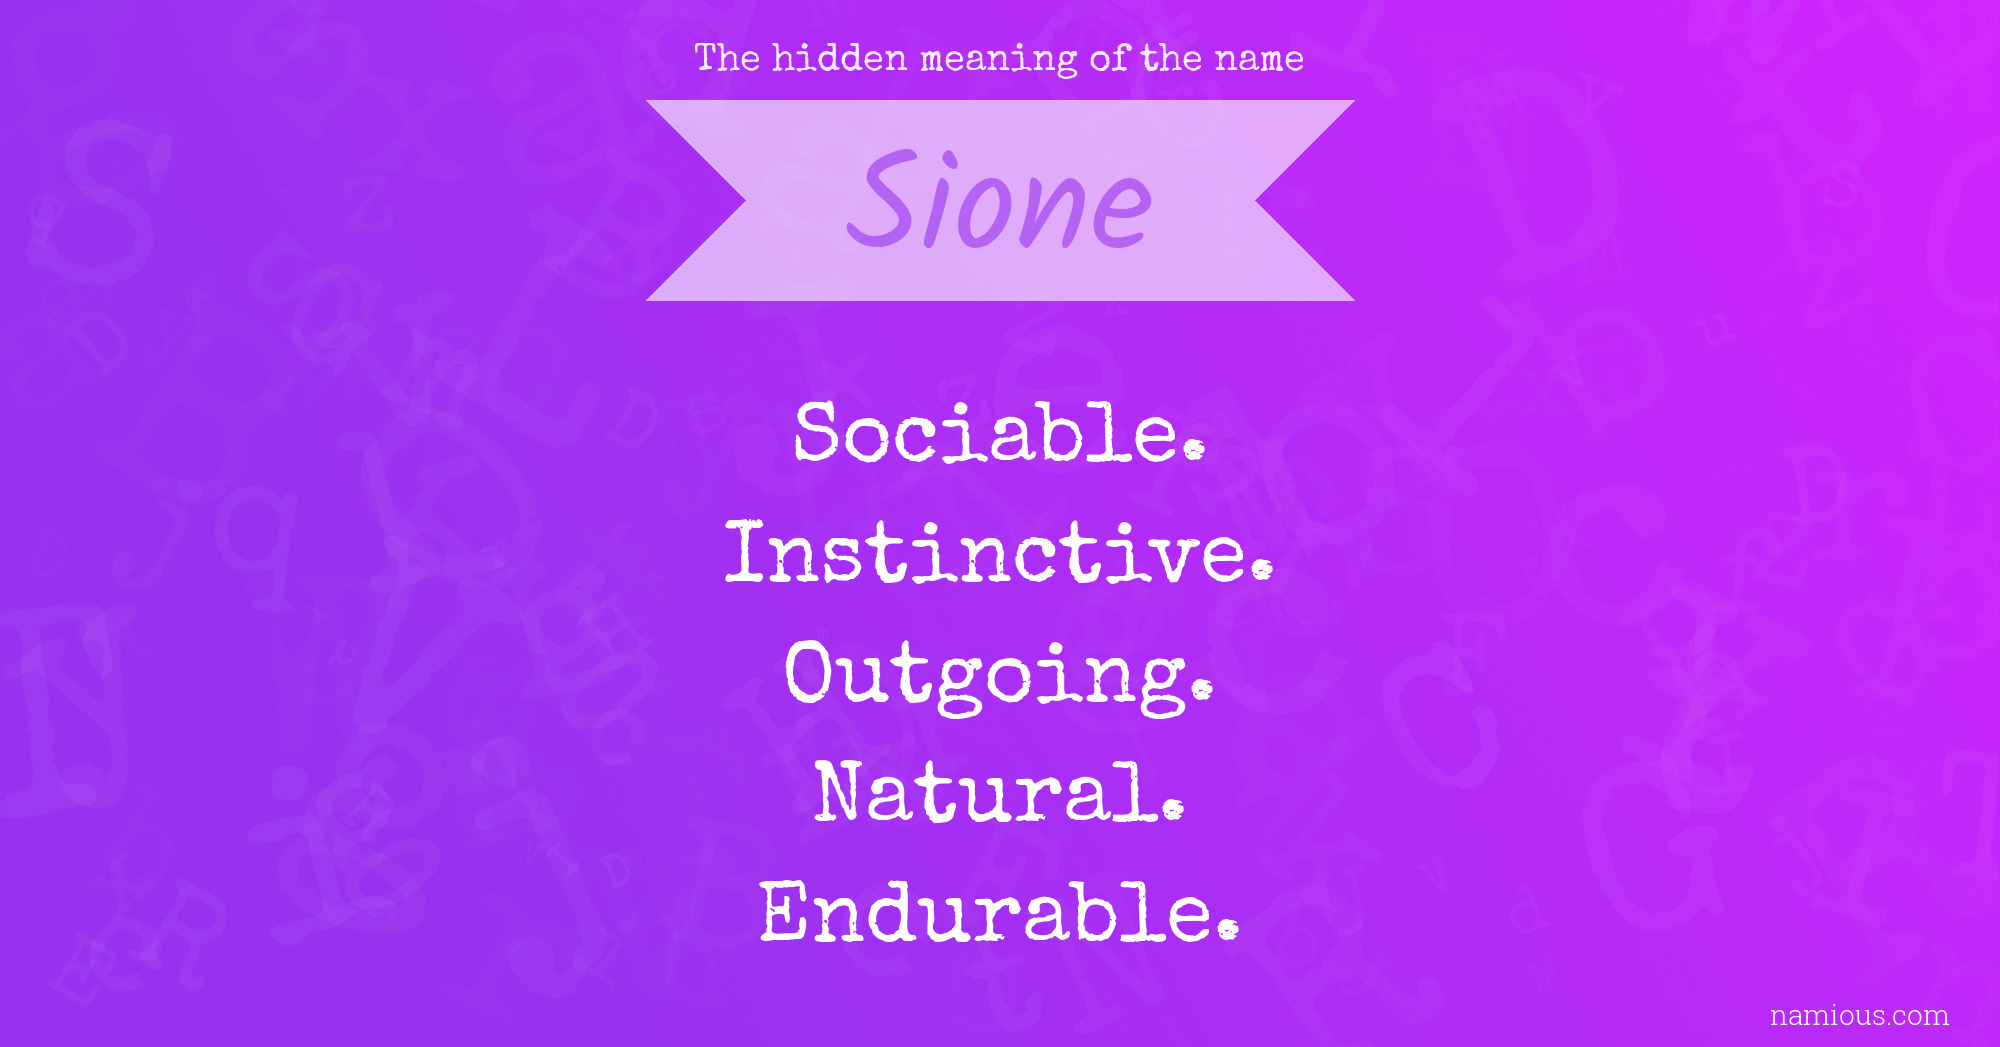 The hidden meaning of the name Sione